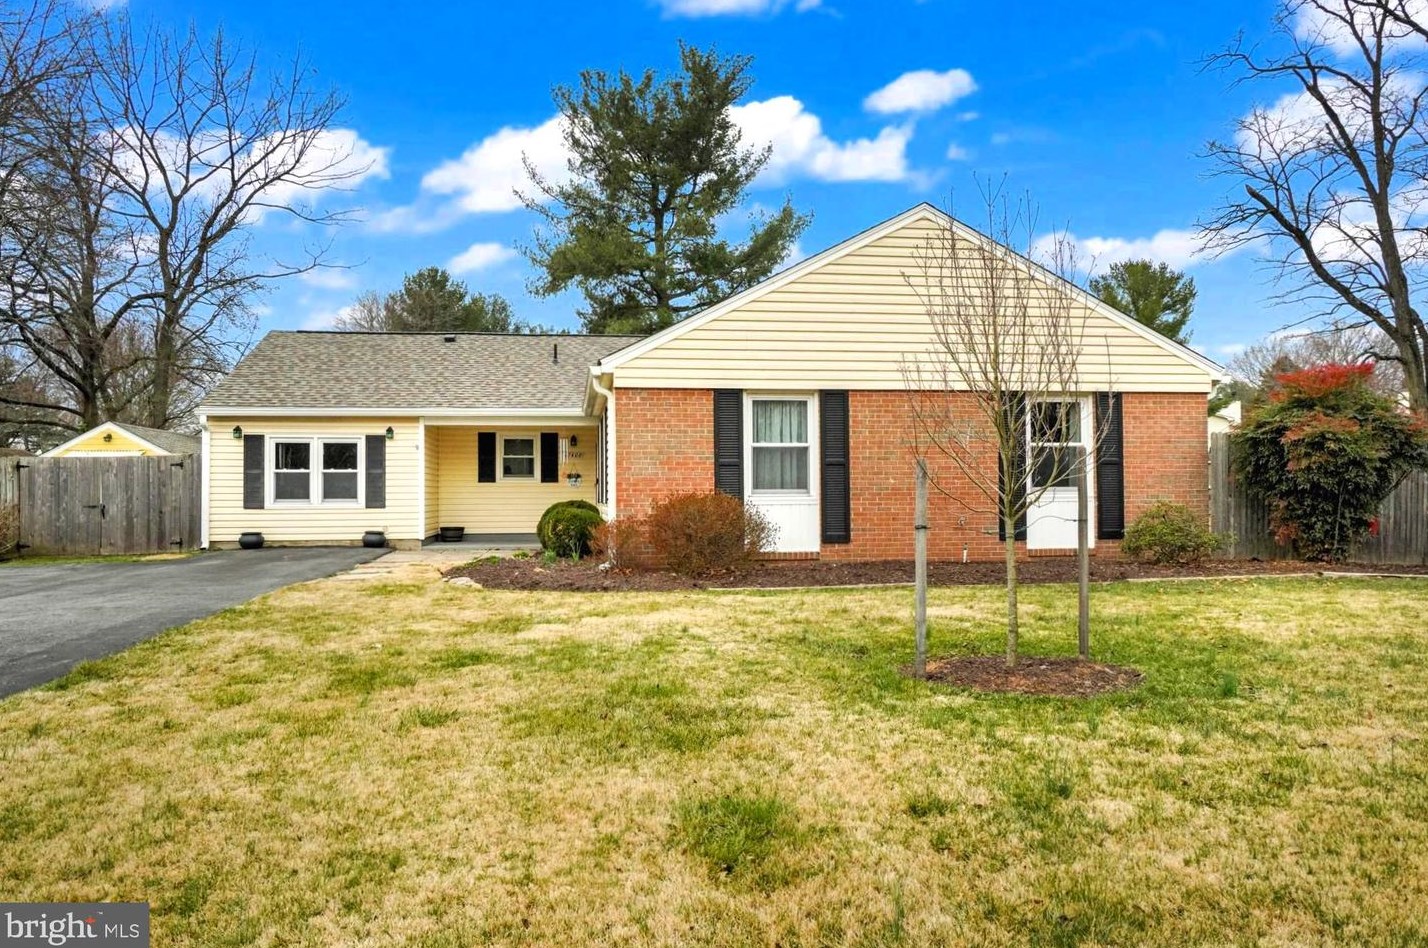 17408 Hughes Rd, Poolesville, MD 20837